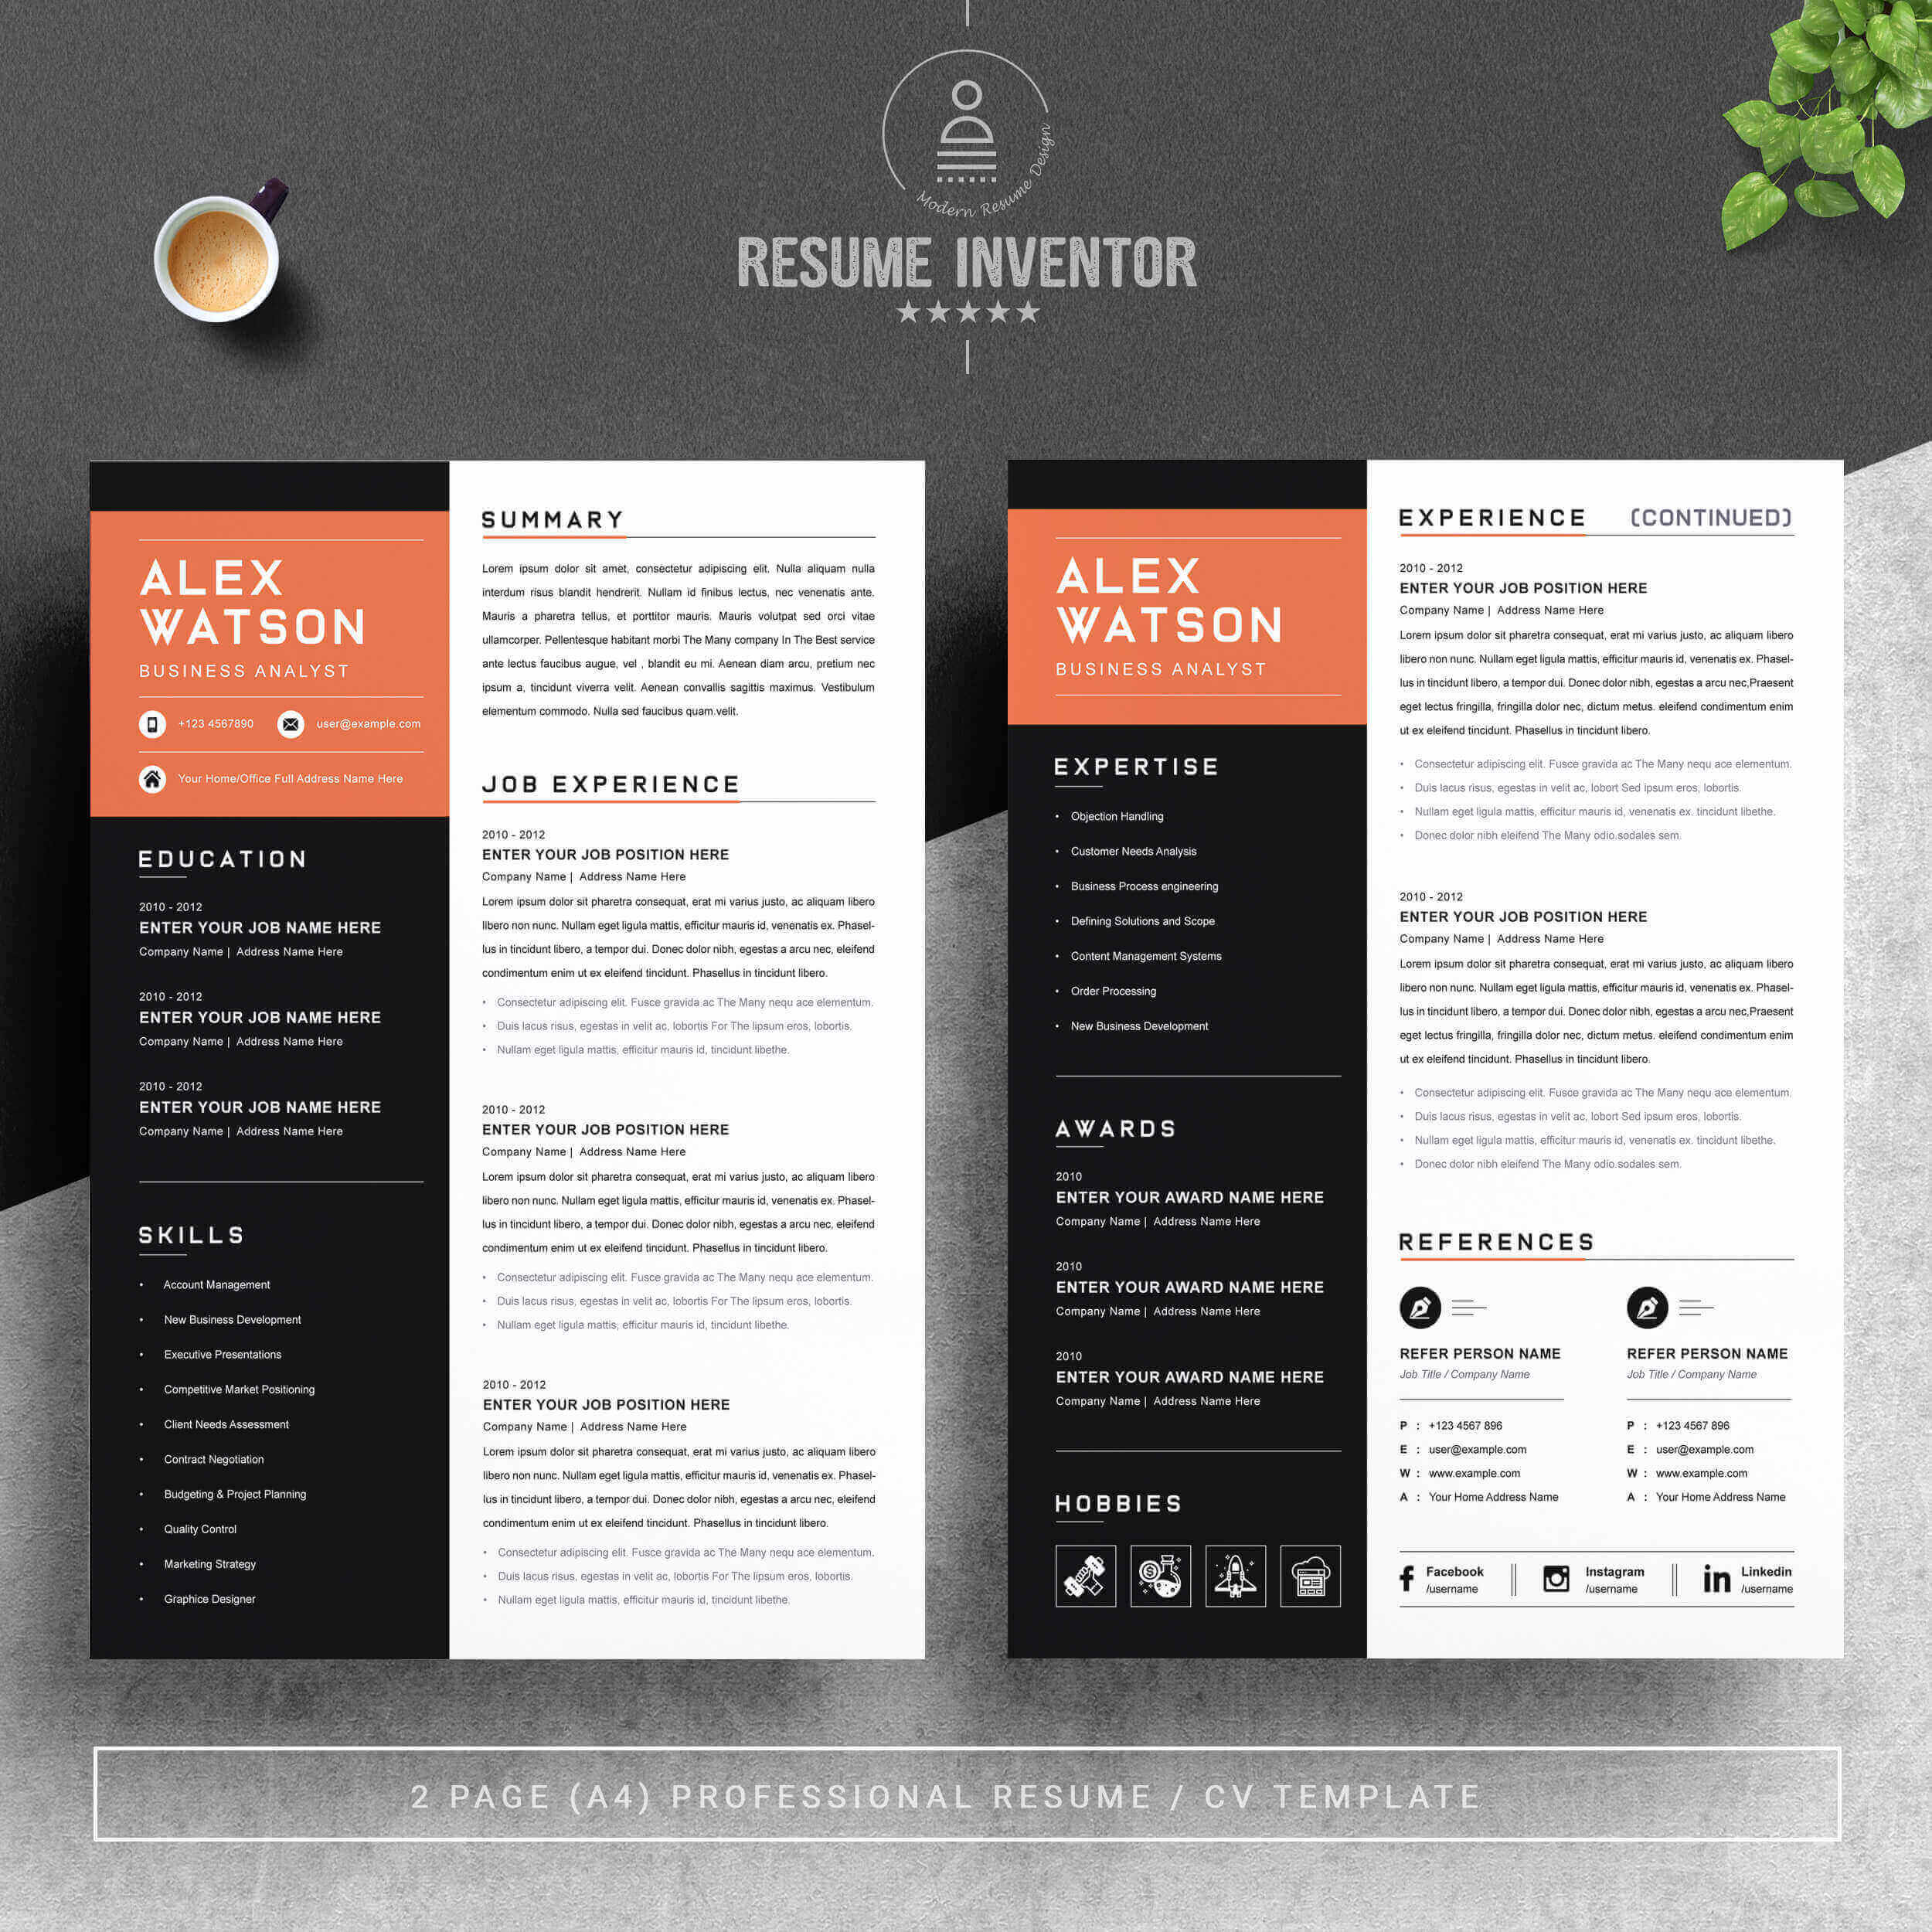 Business Analyst Resume Template | Classic Resume Template preview image.